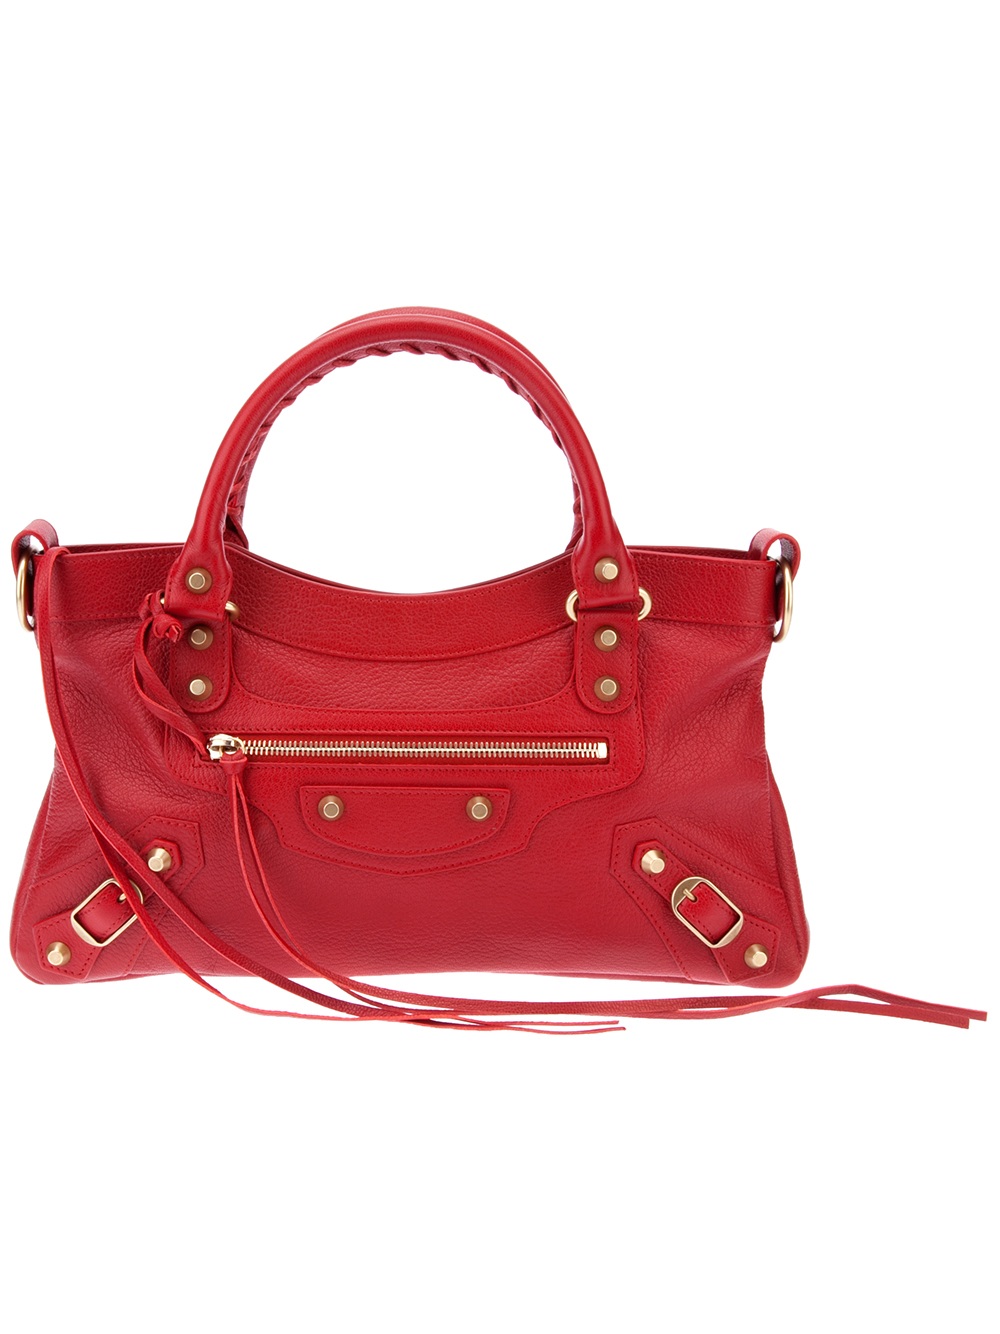 Balenciaga Tote Bag in Red | Lyst